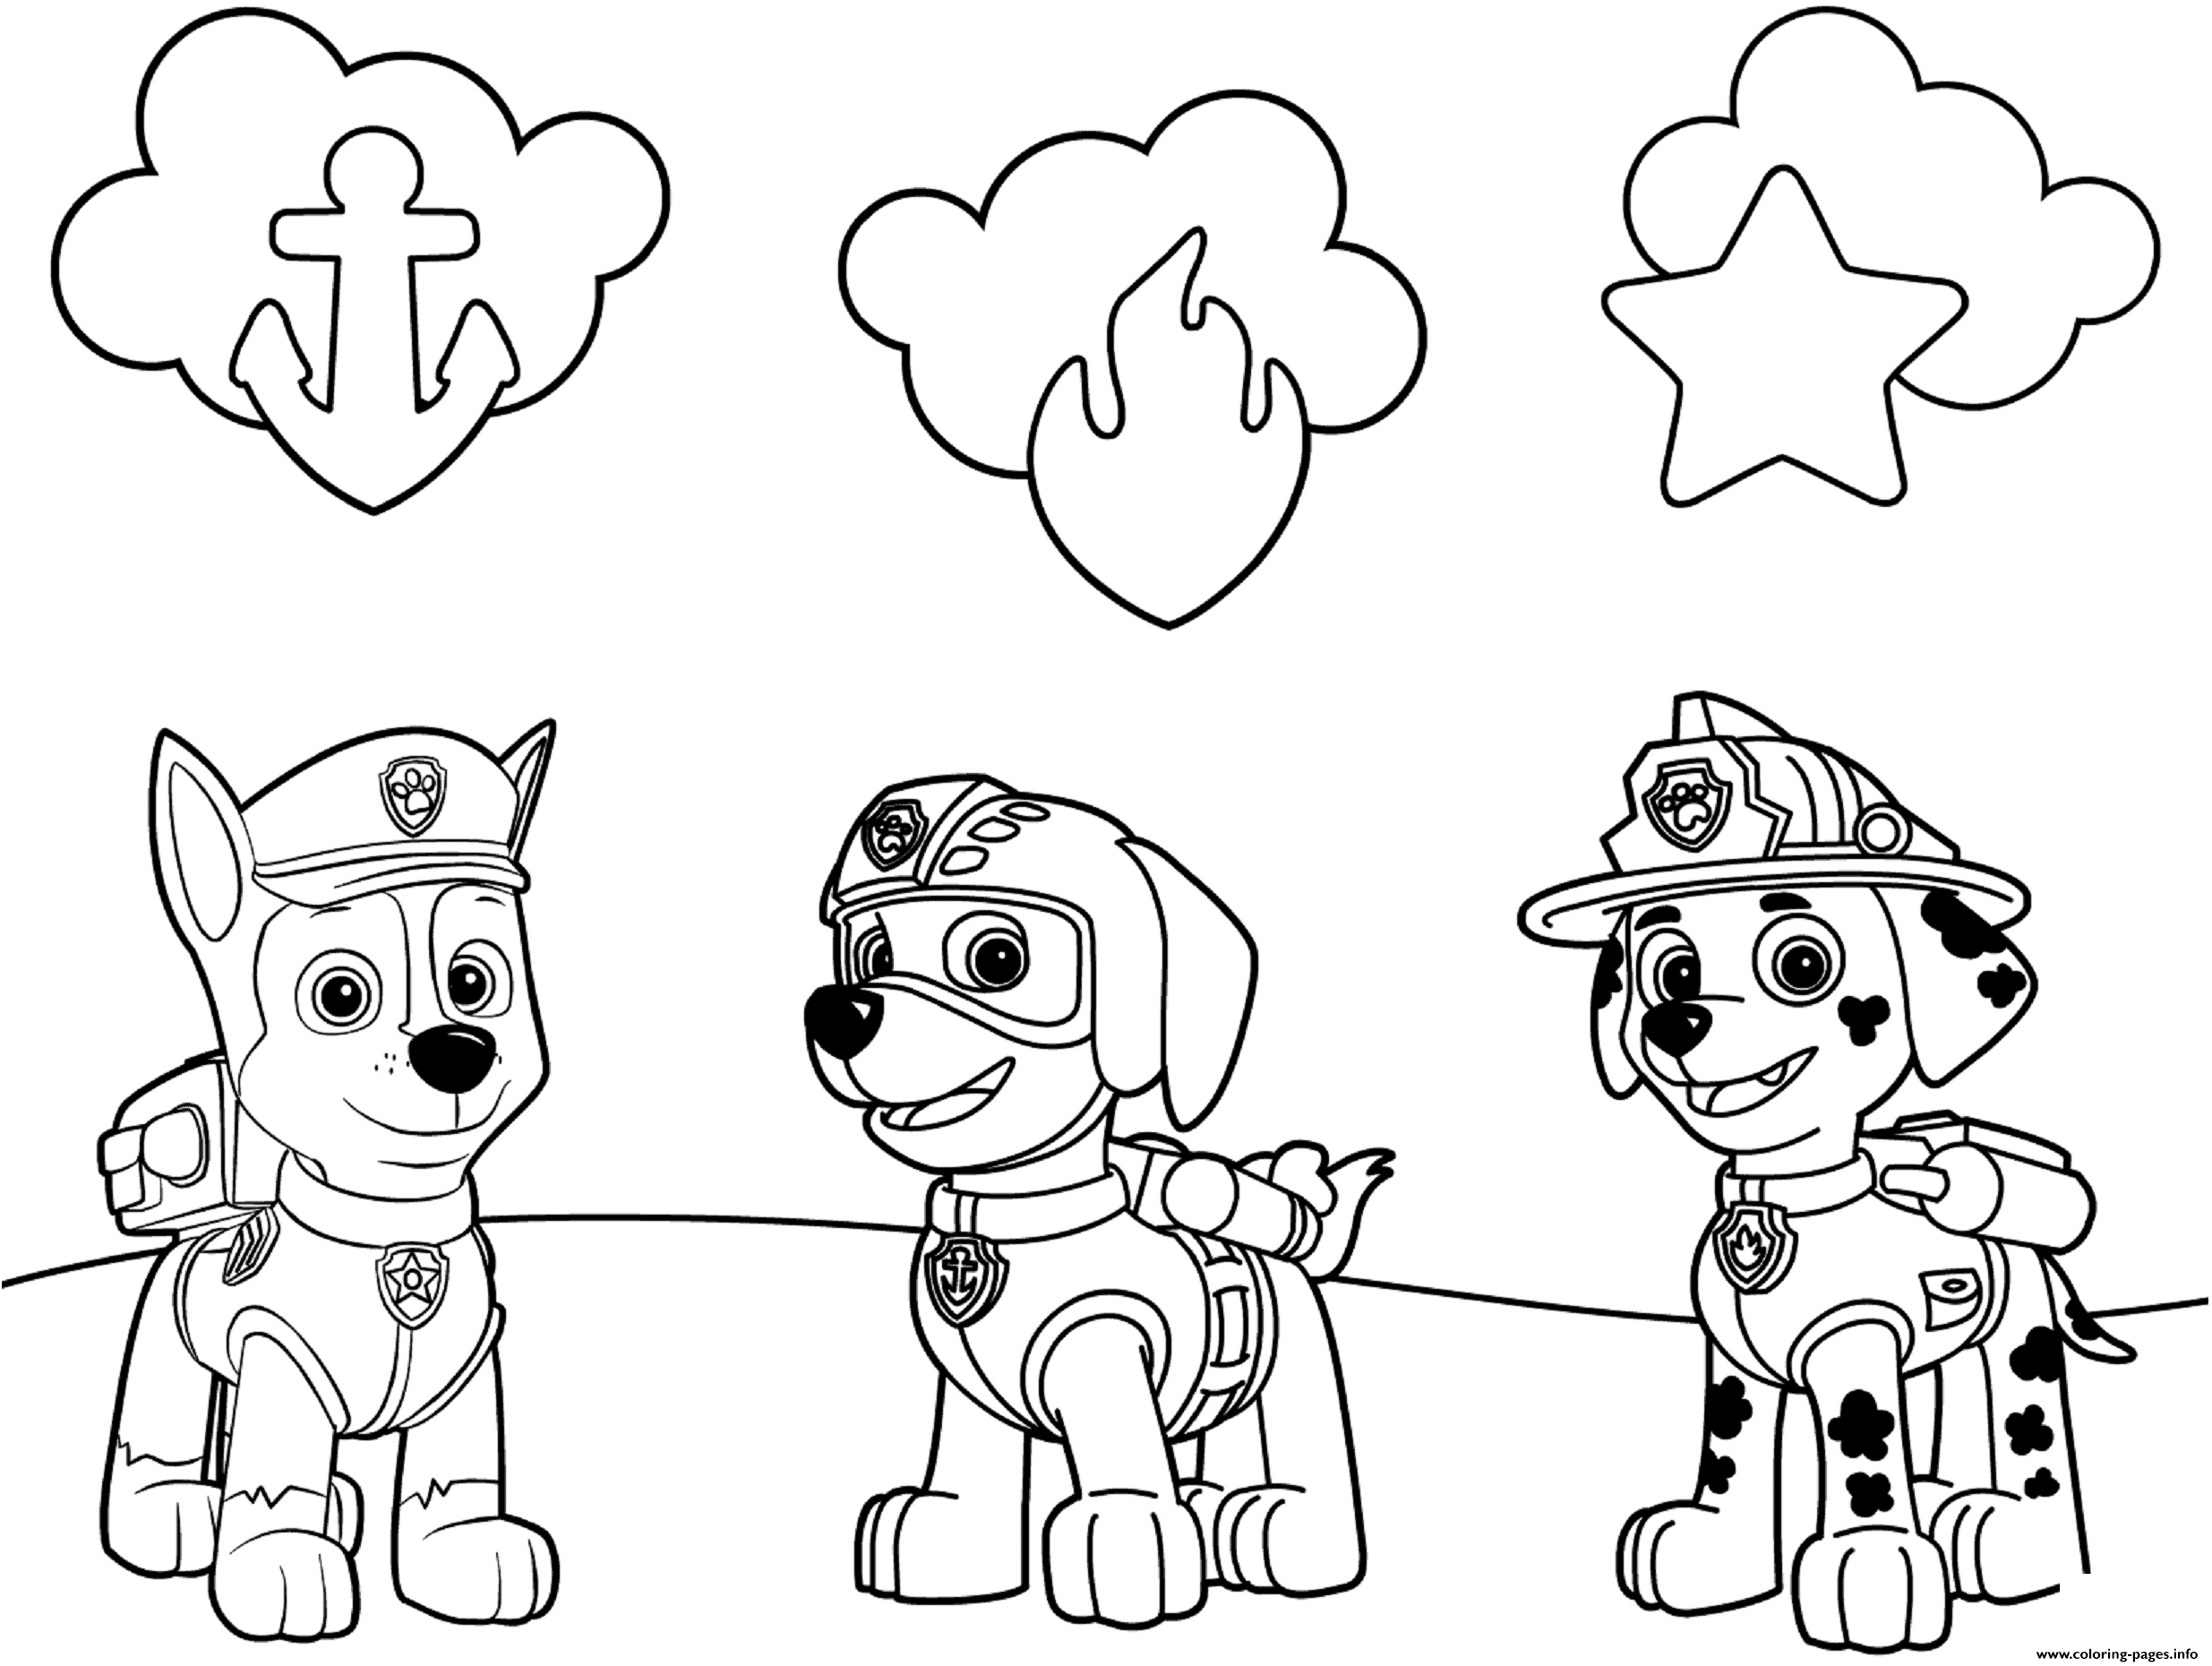 Tracker Paw Patrol Coloring Pages Printable for Free Download